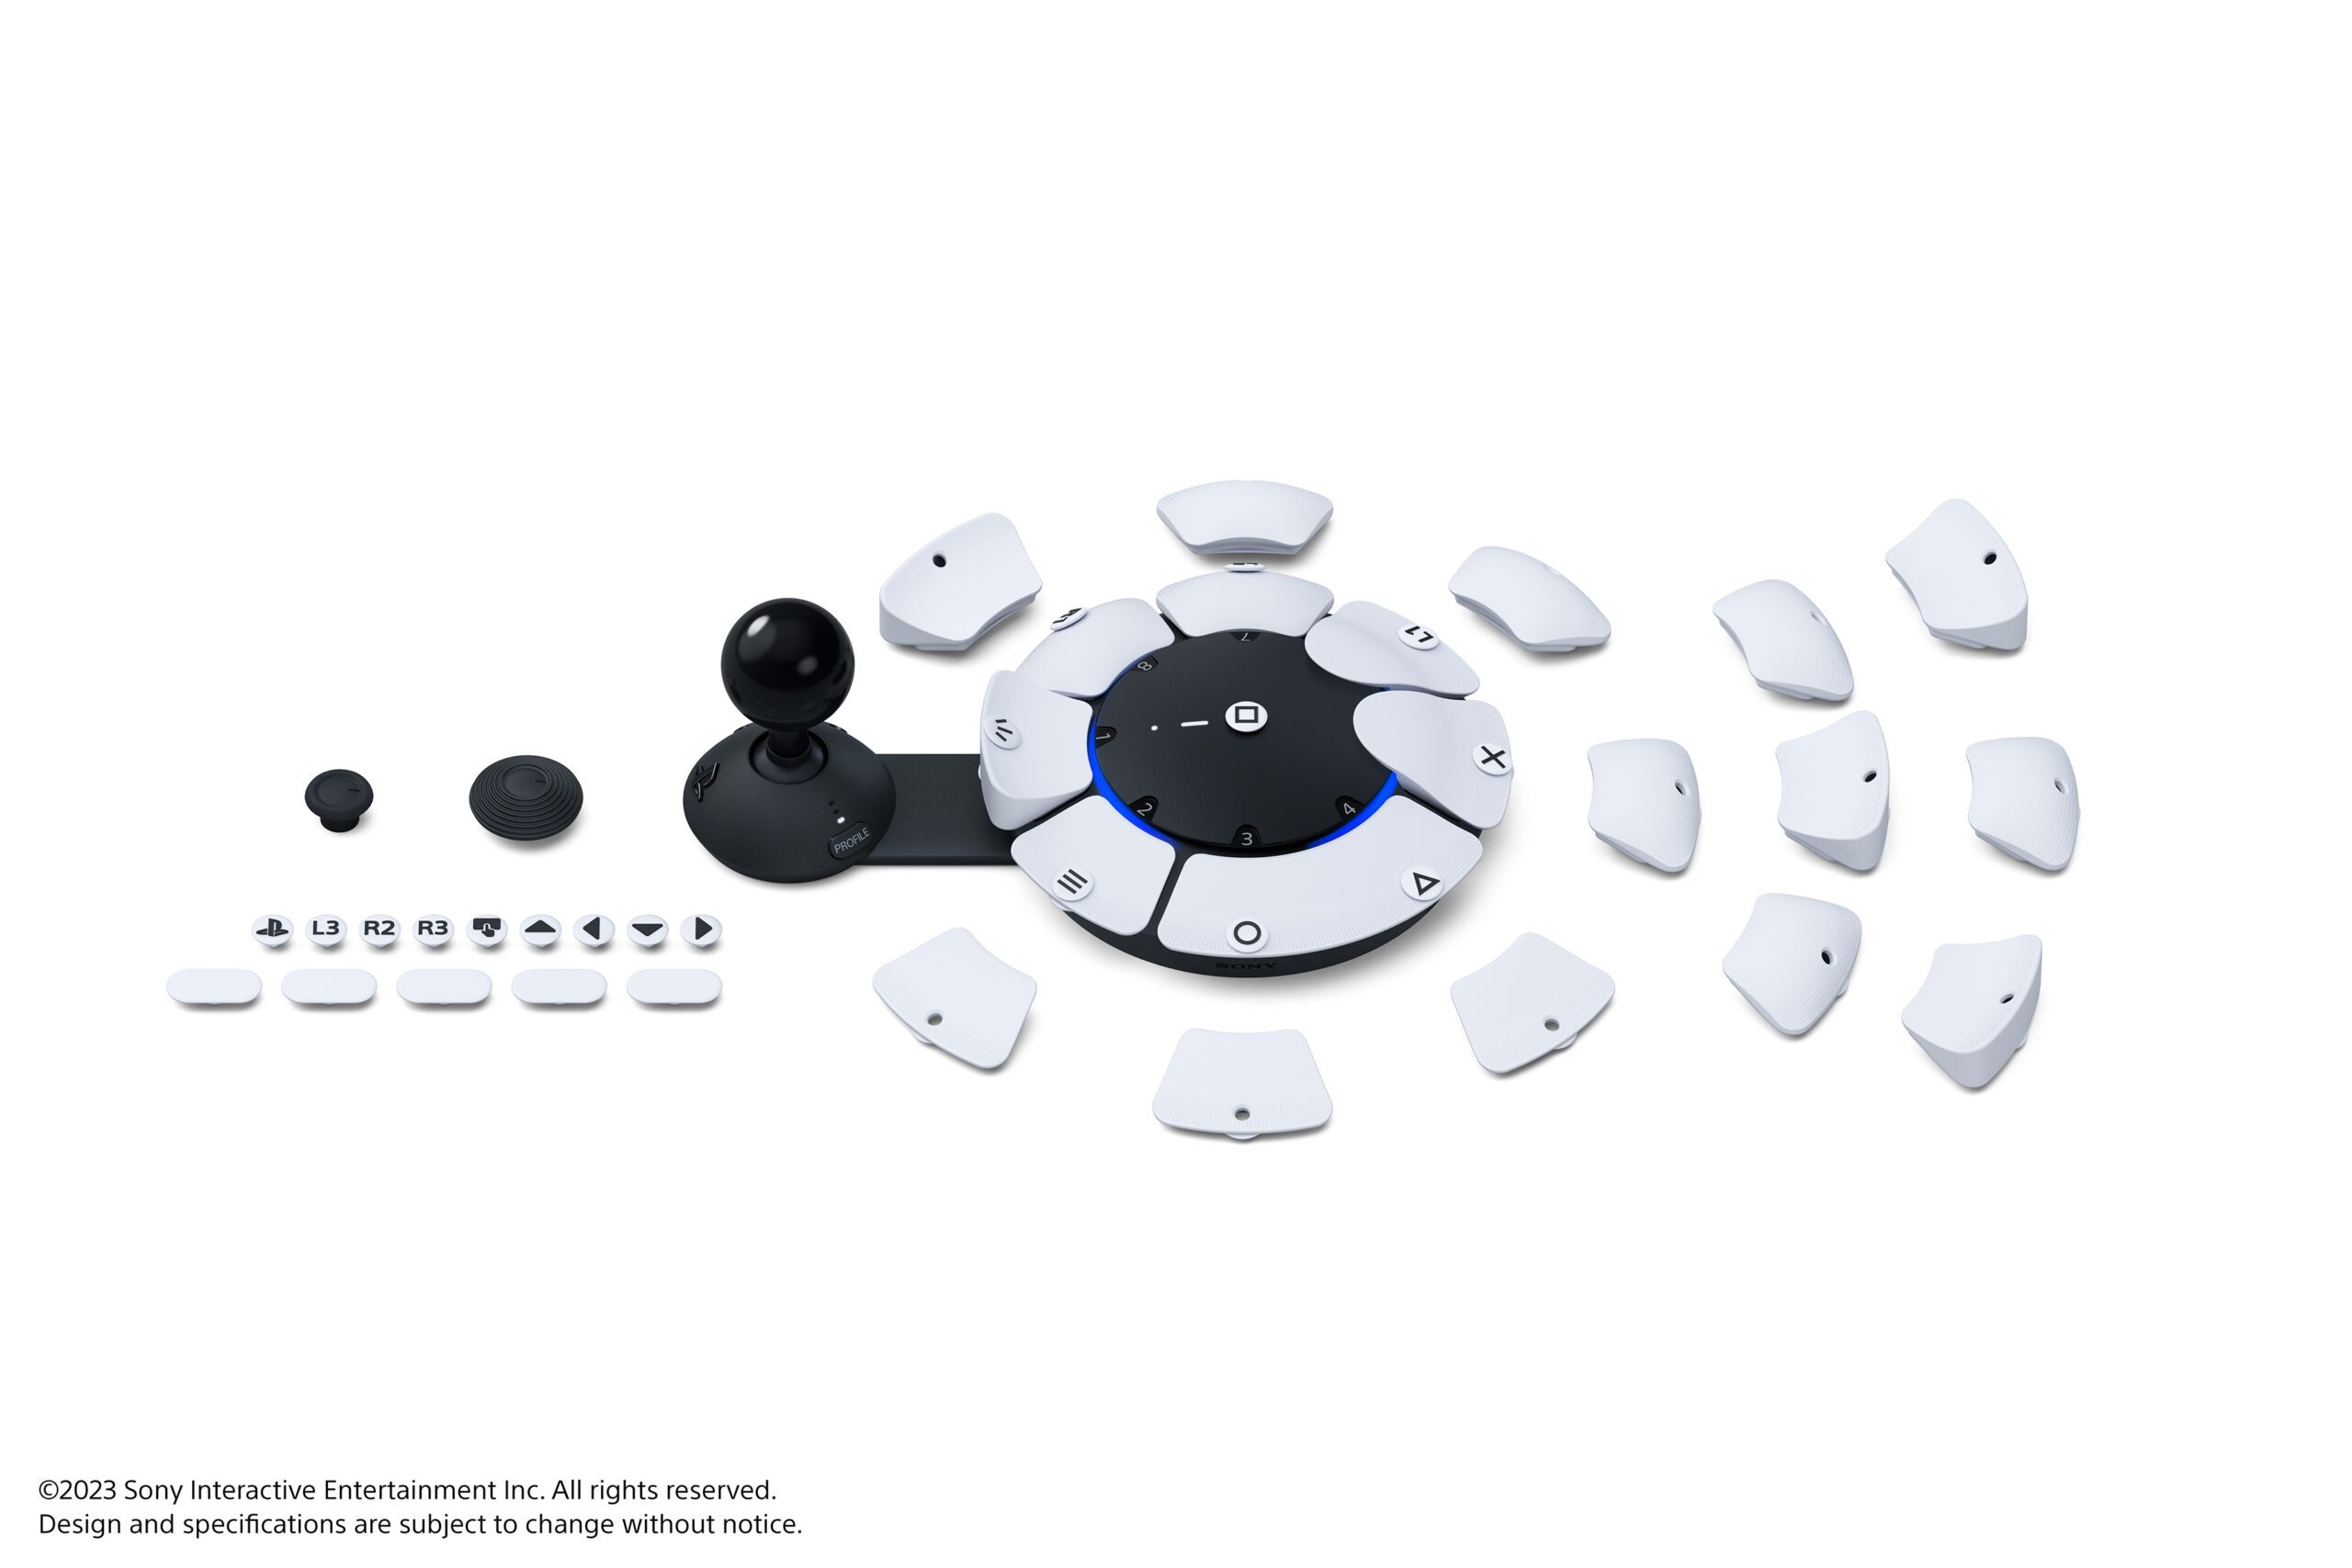 Image showing the Access controller and its swappable analog stick caps, button caps and button cap tags